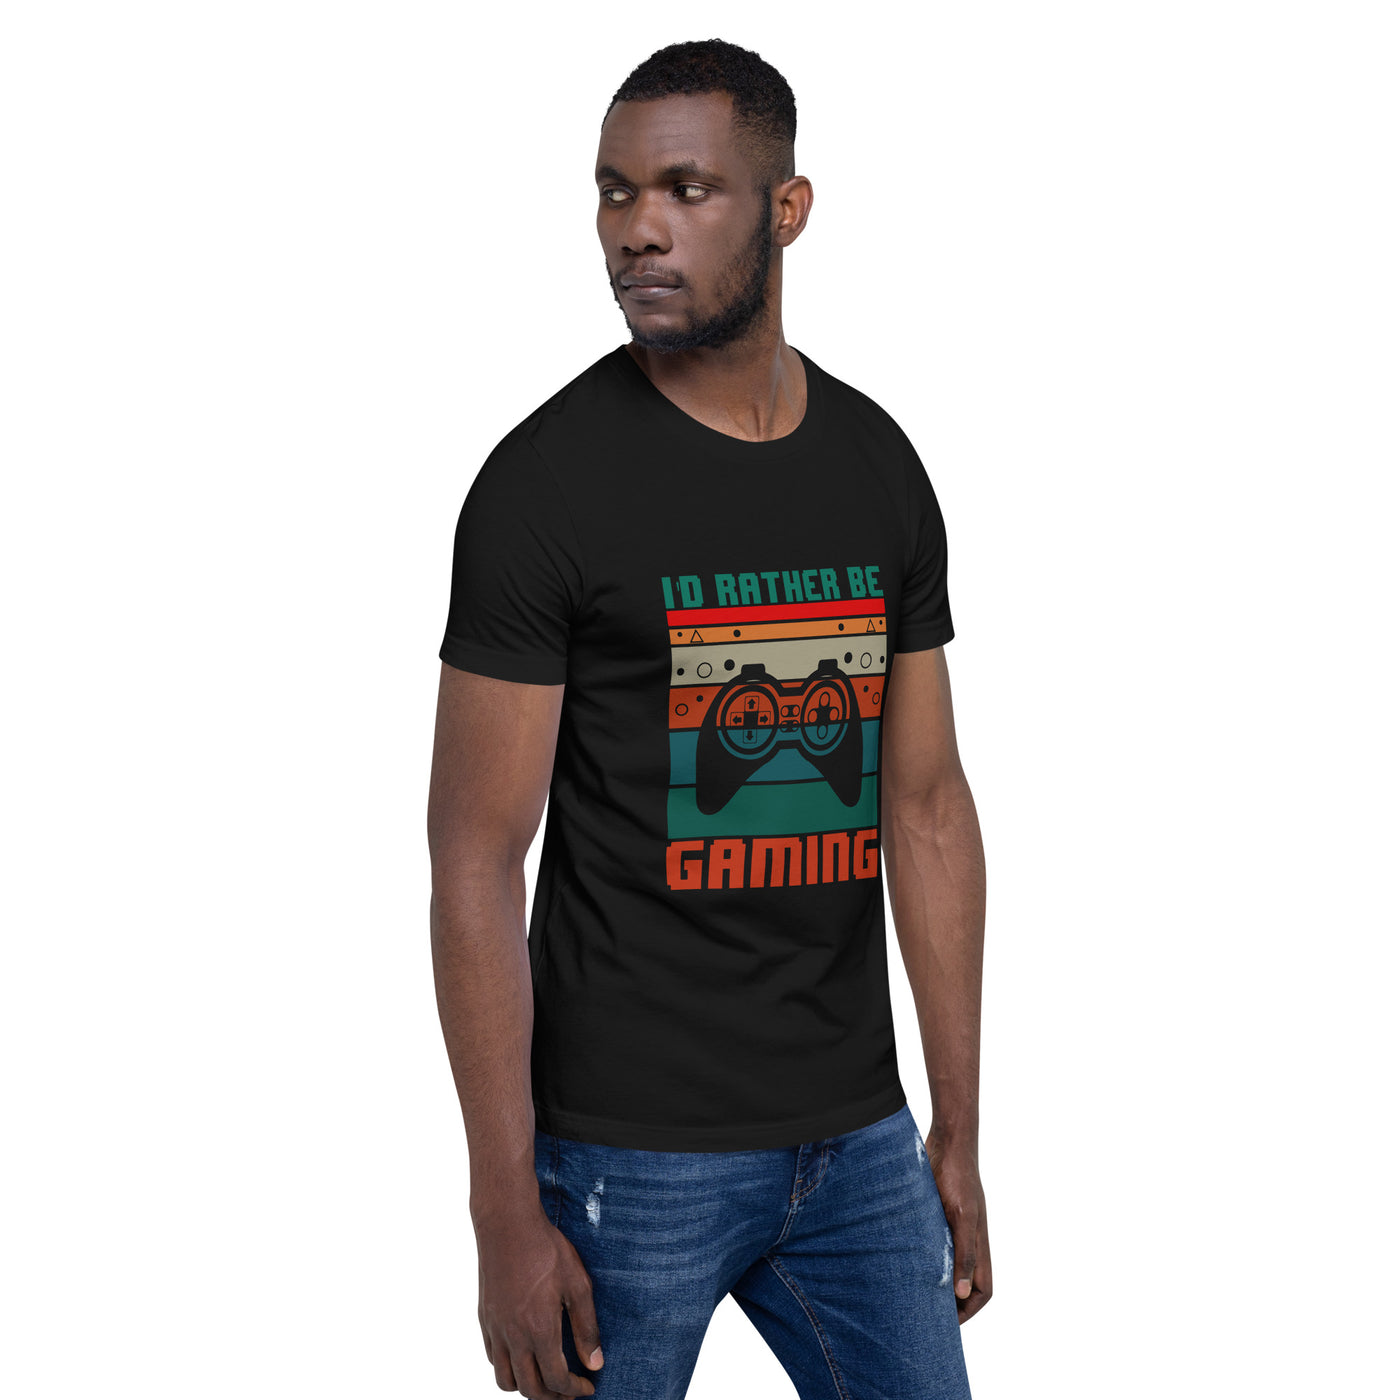 I'd rather be Gaming - Unisex t-shirt